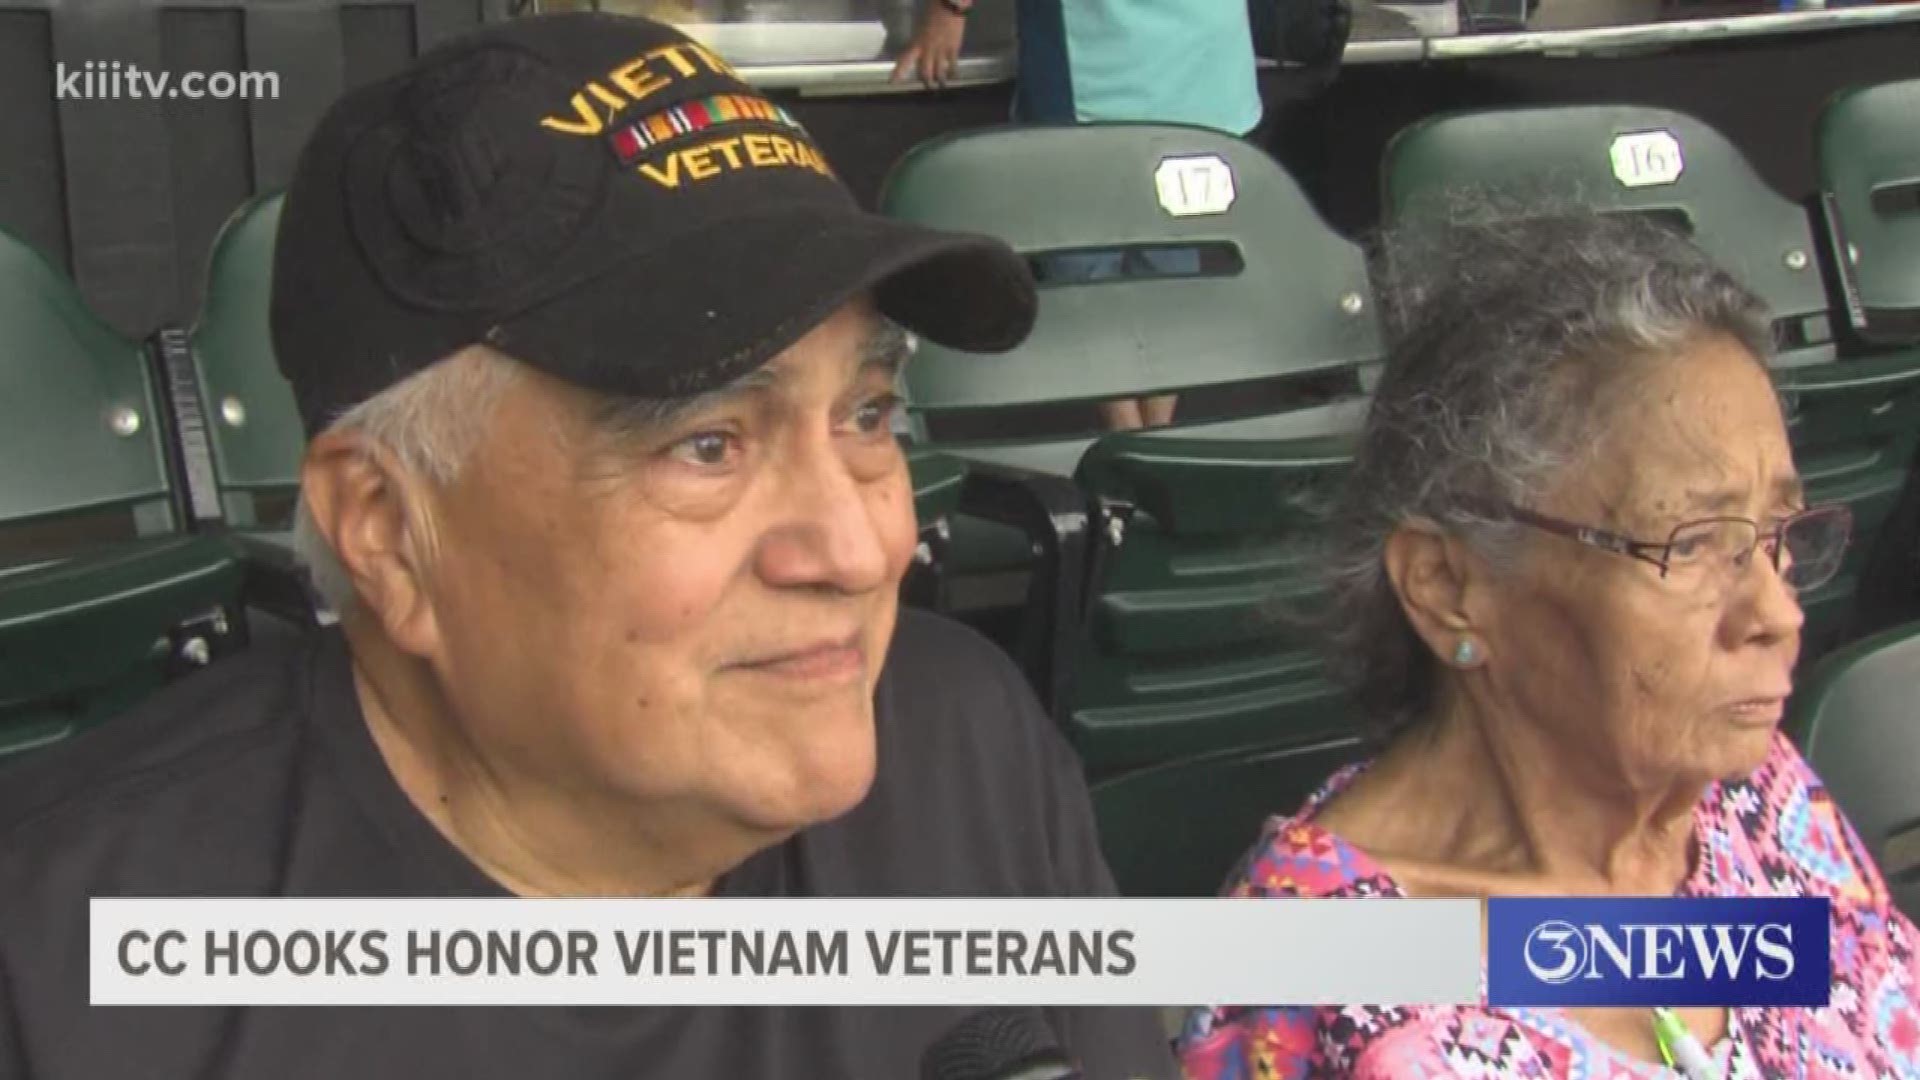 The Hooks partnered with Humana Insurance to give Vietnam veterans recognition that they felt was long overdue.